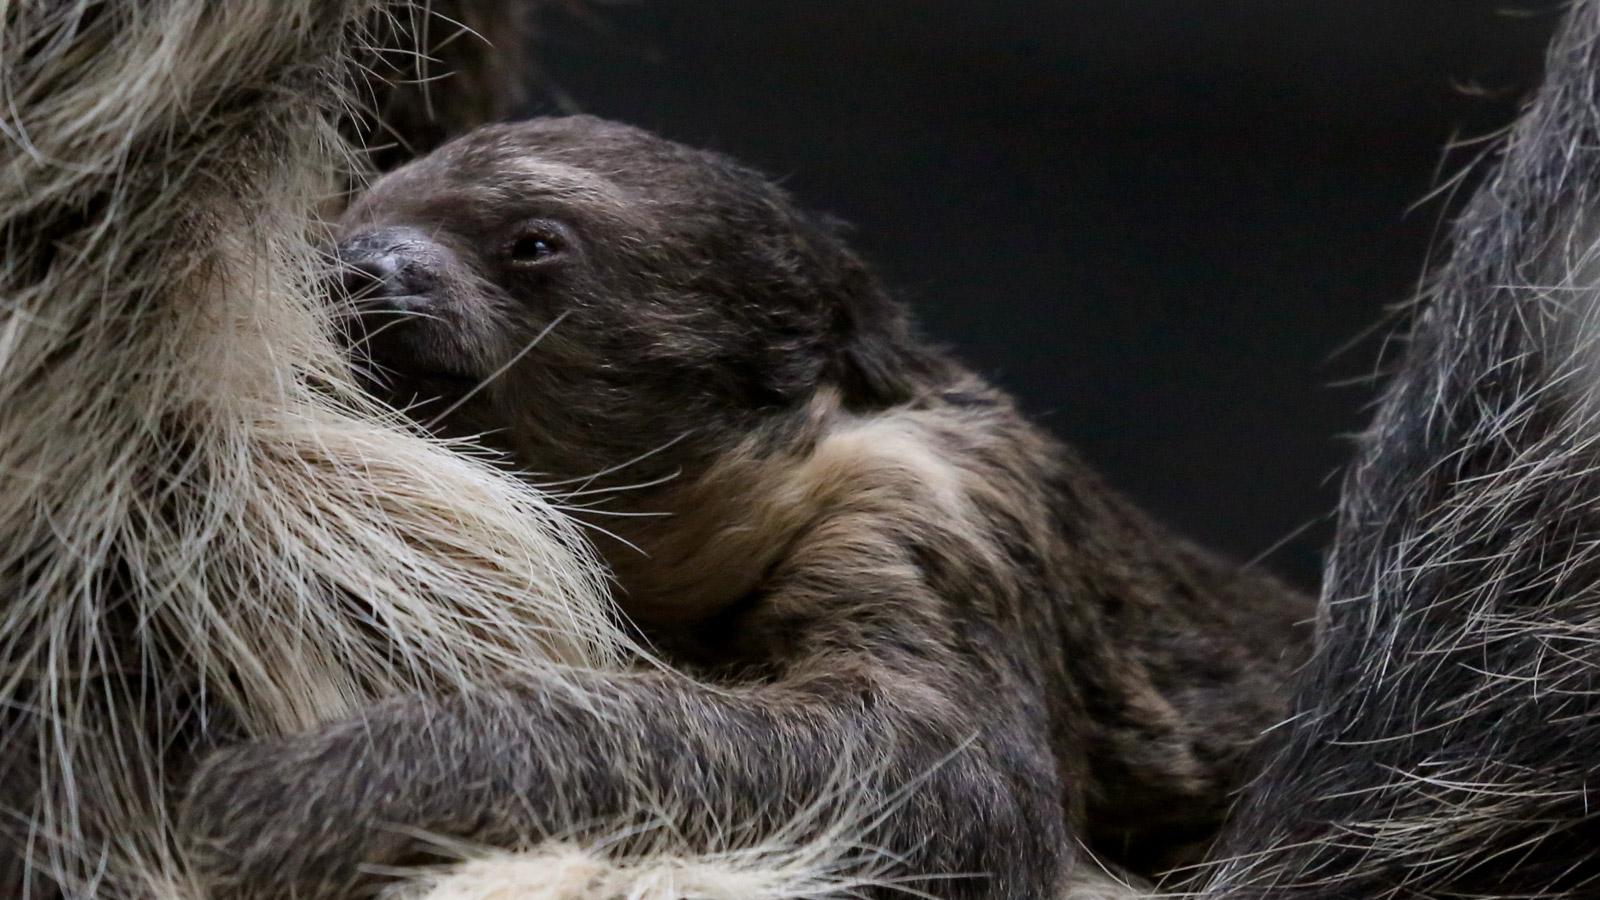 VIDEO: Baby Sloth At Denver Zoo Starting To Eat Solid Food